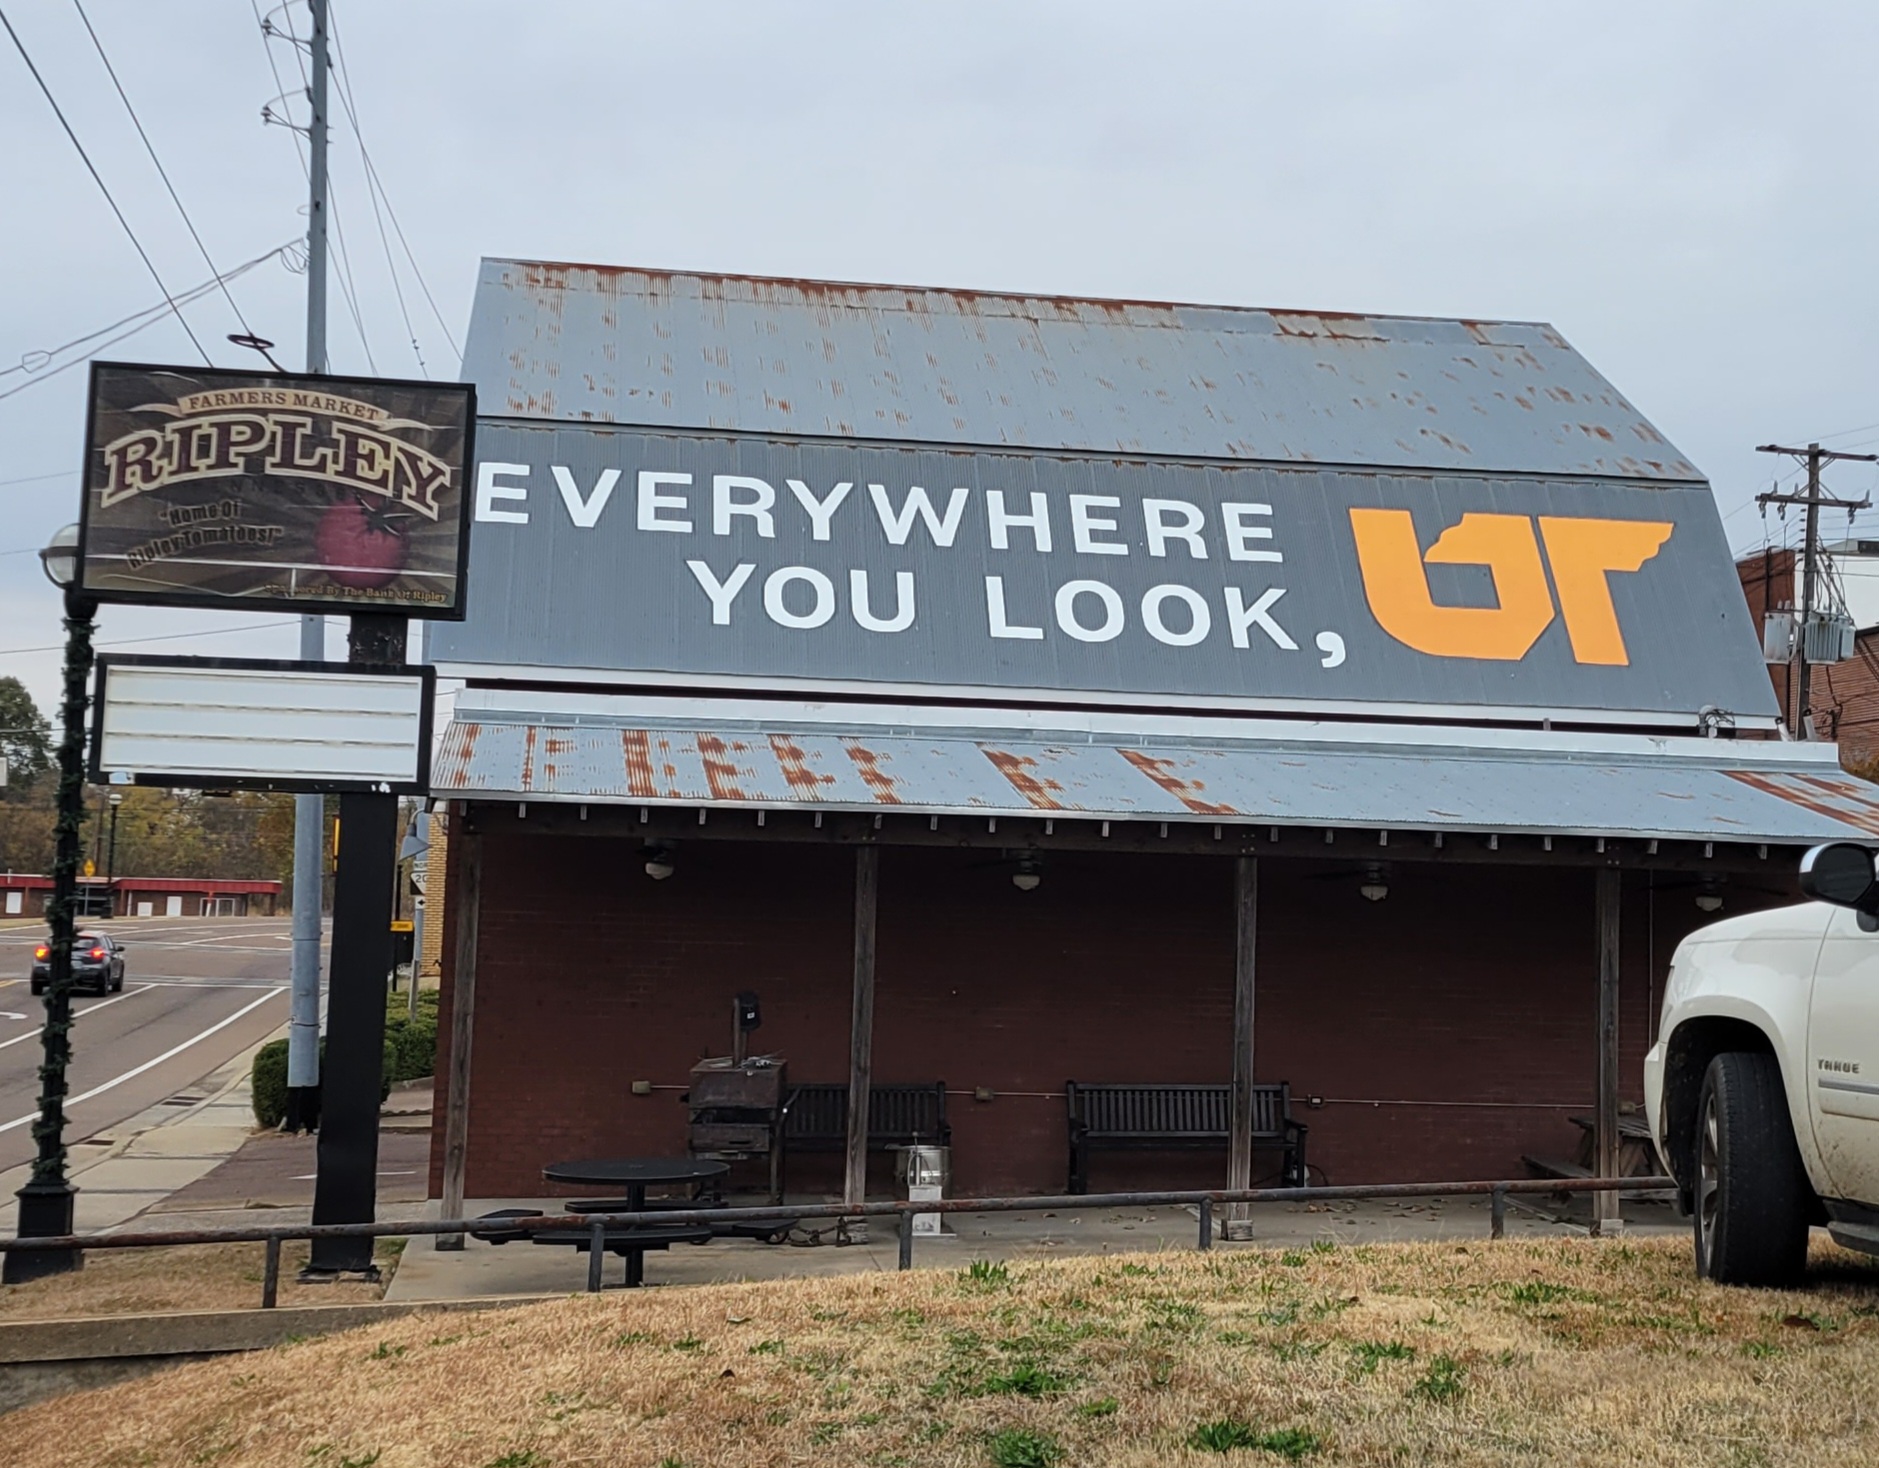 Orange and white "Everywhere You Look, UT" mural painted on gray metal barn roof in downtown Ripley, Tennessee